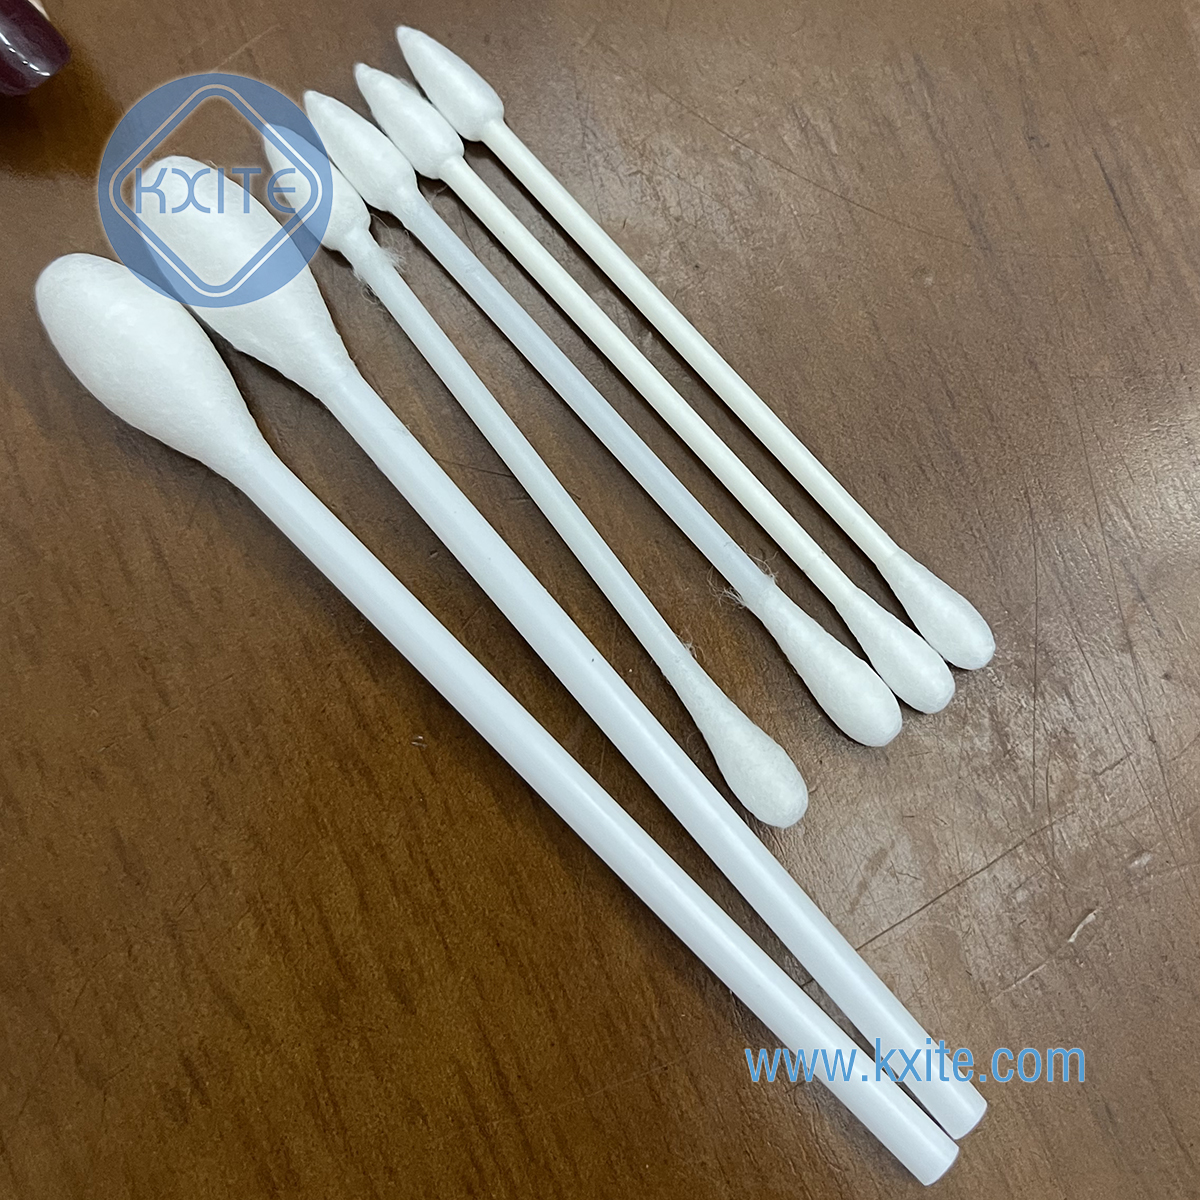 high speed Min Cotton Buds Swabs Forming and Packing Machine